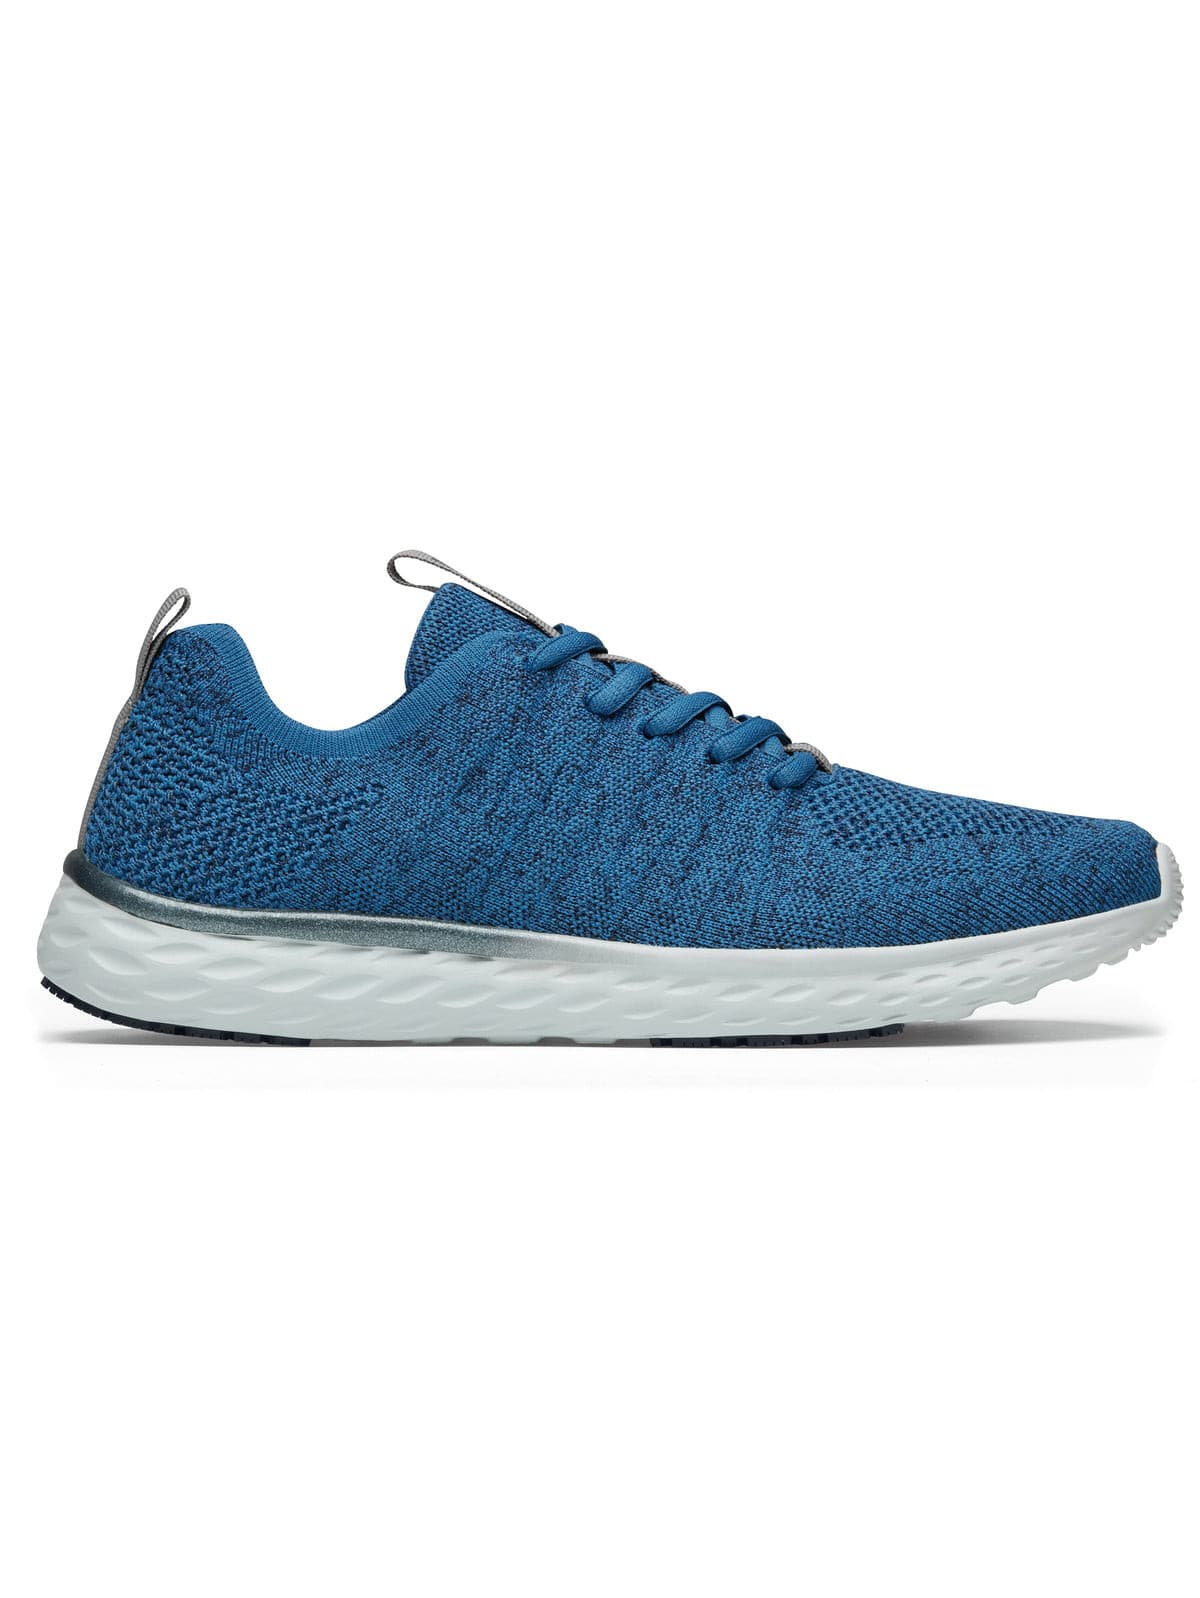 Men's Work Shoe Everlight Ocean Blue by Shoes For Crews -  ChefsCotton